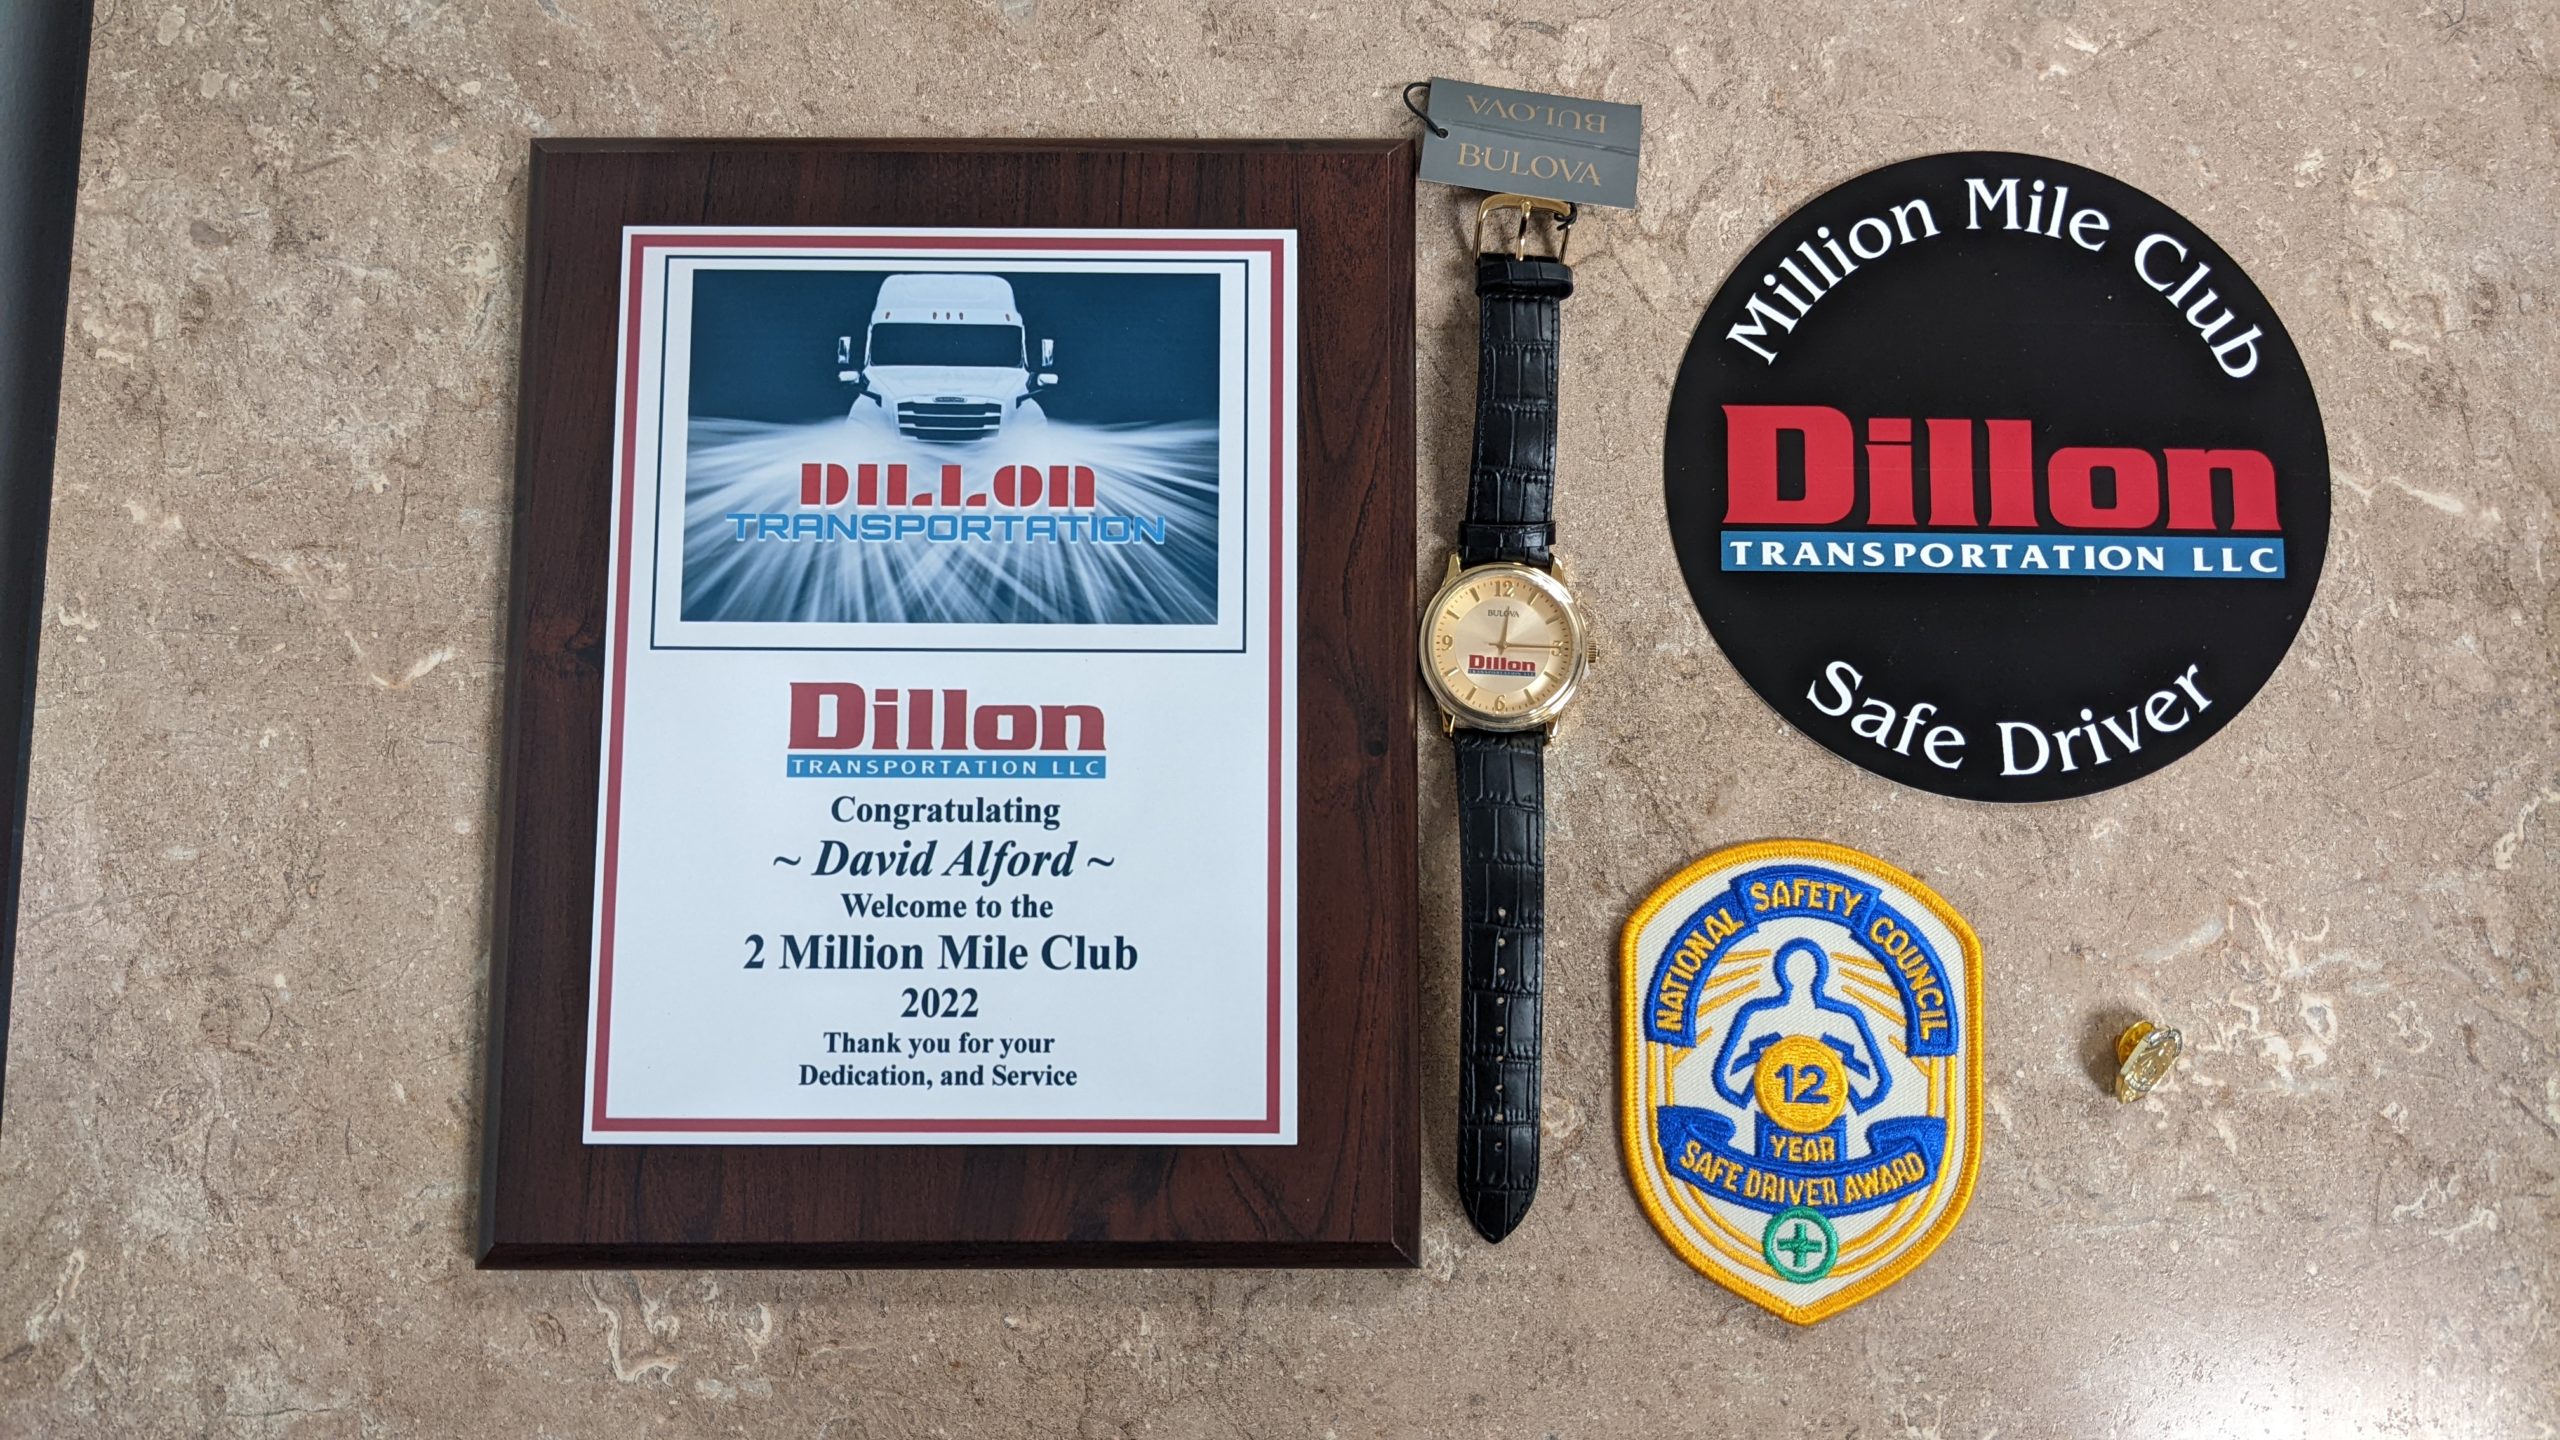 David's Plaque for his Induction into the Million Mile Club 